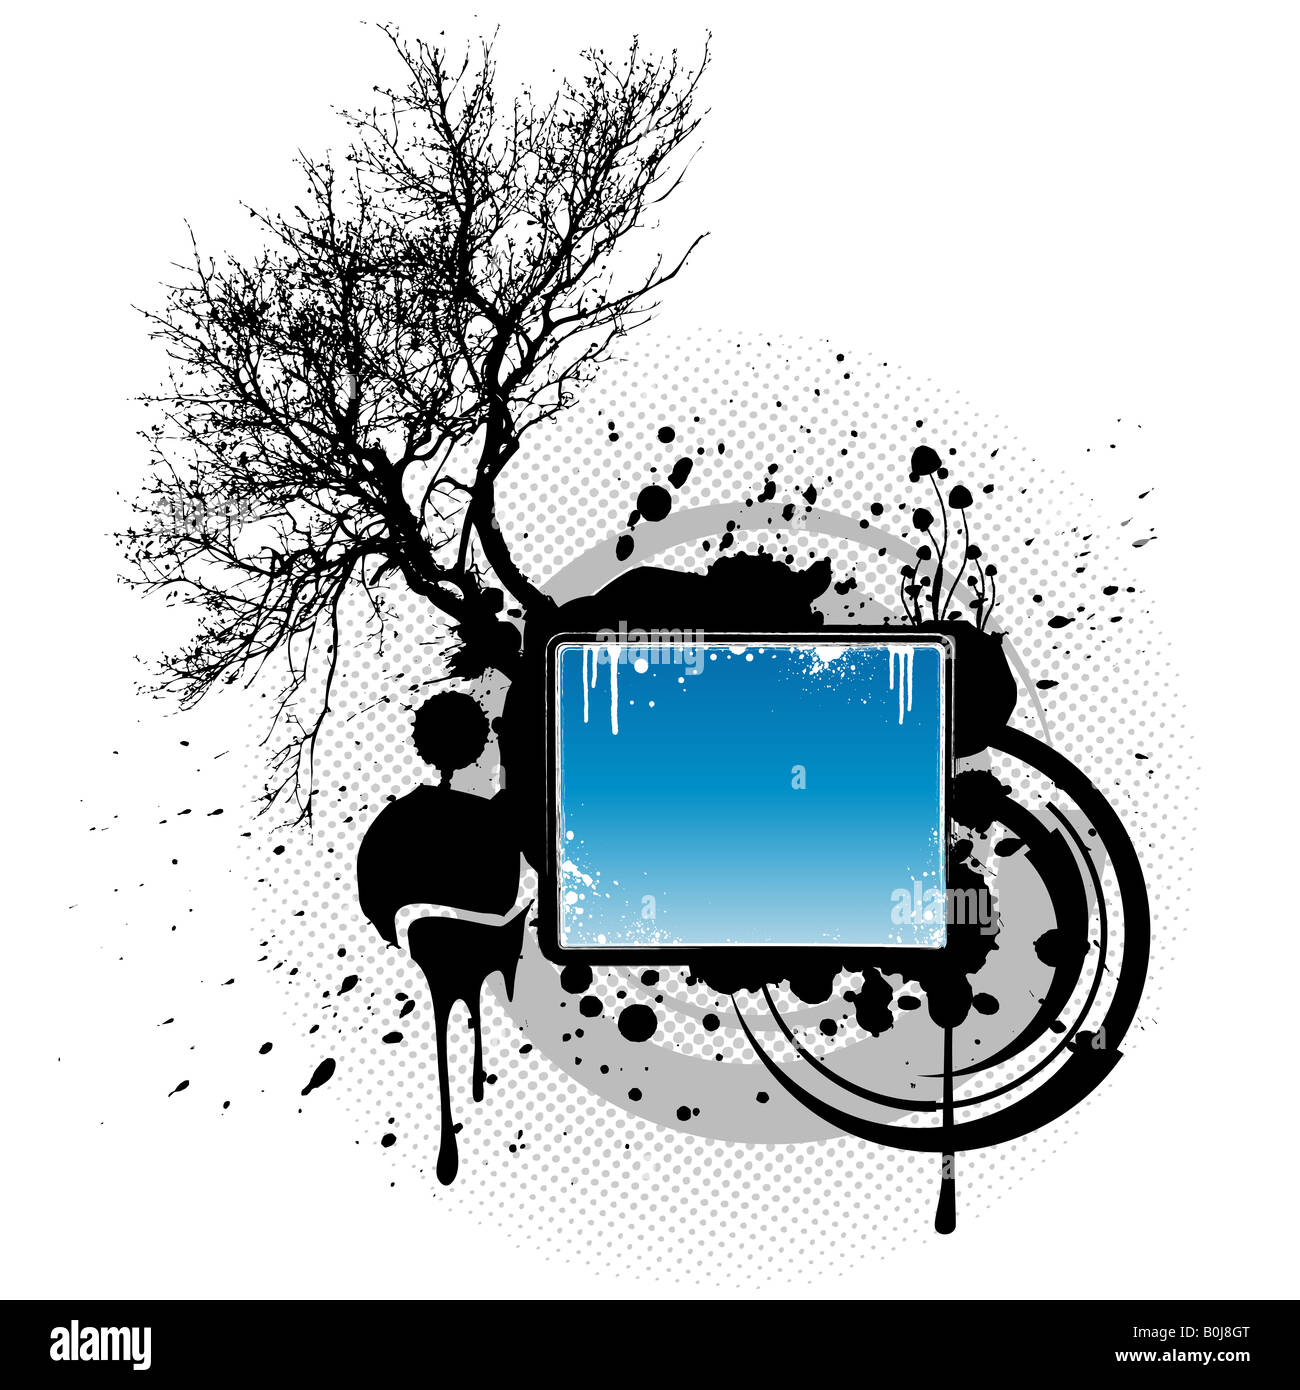 Vector illustration of a grunge modern style design element with splatter ink drops tree silhouette and halftone background Stock Photo